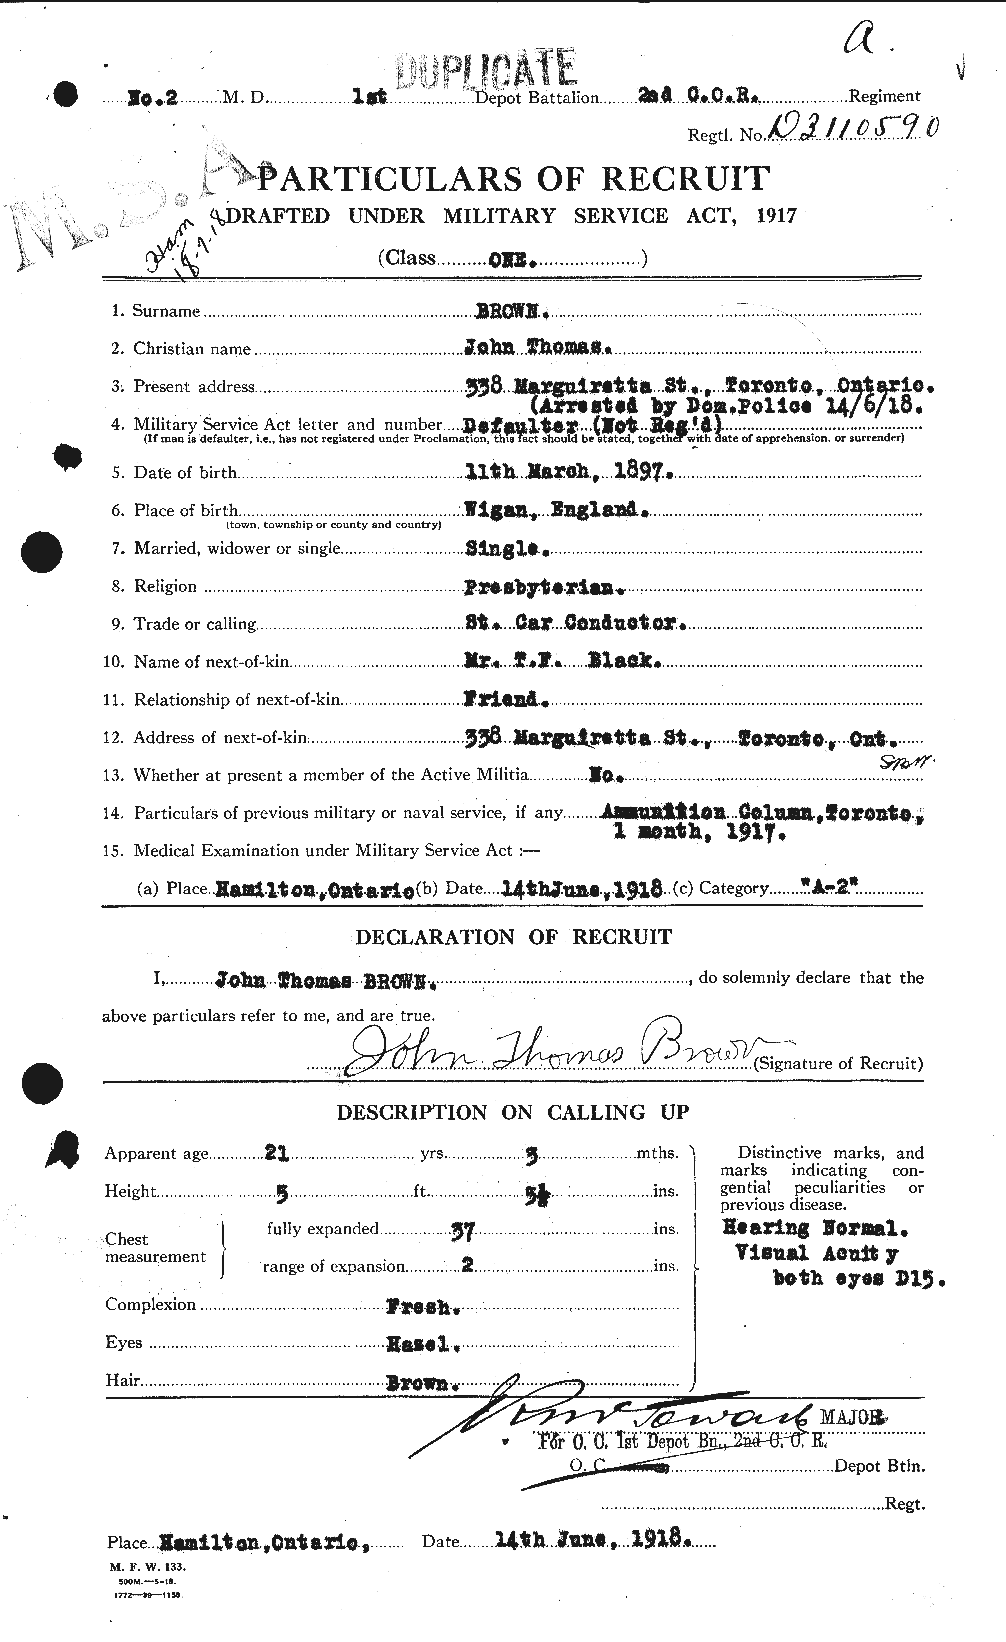 Personnel Records of the First World War - CEF 265885a